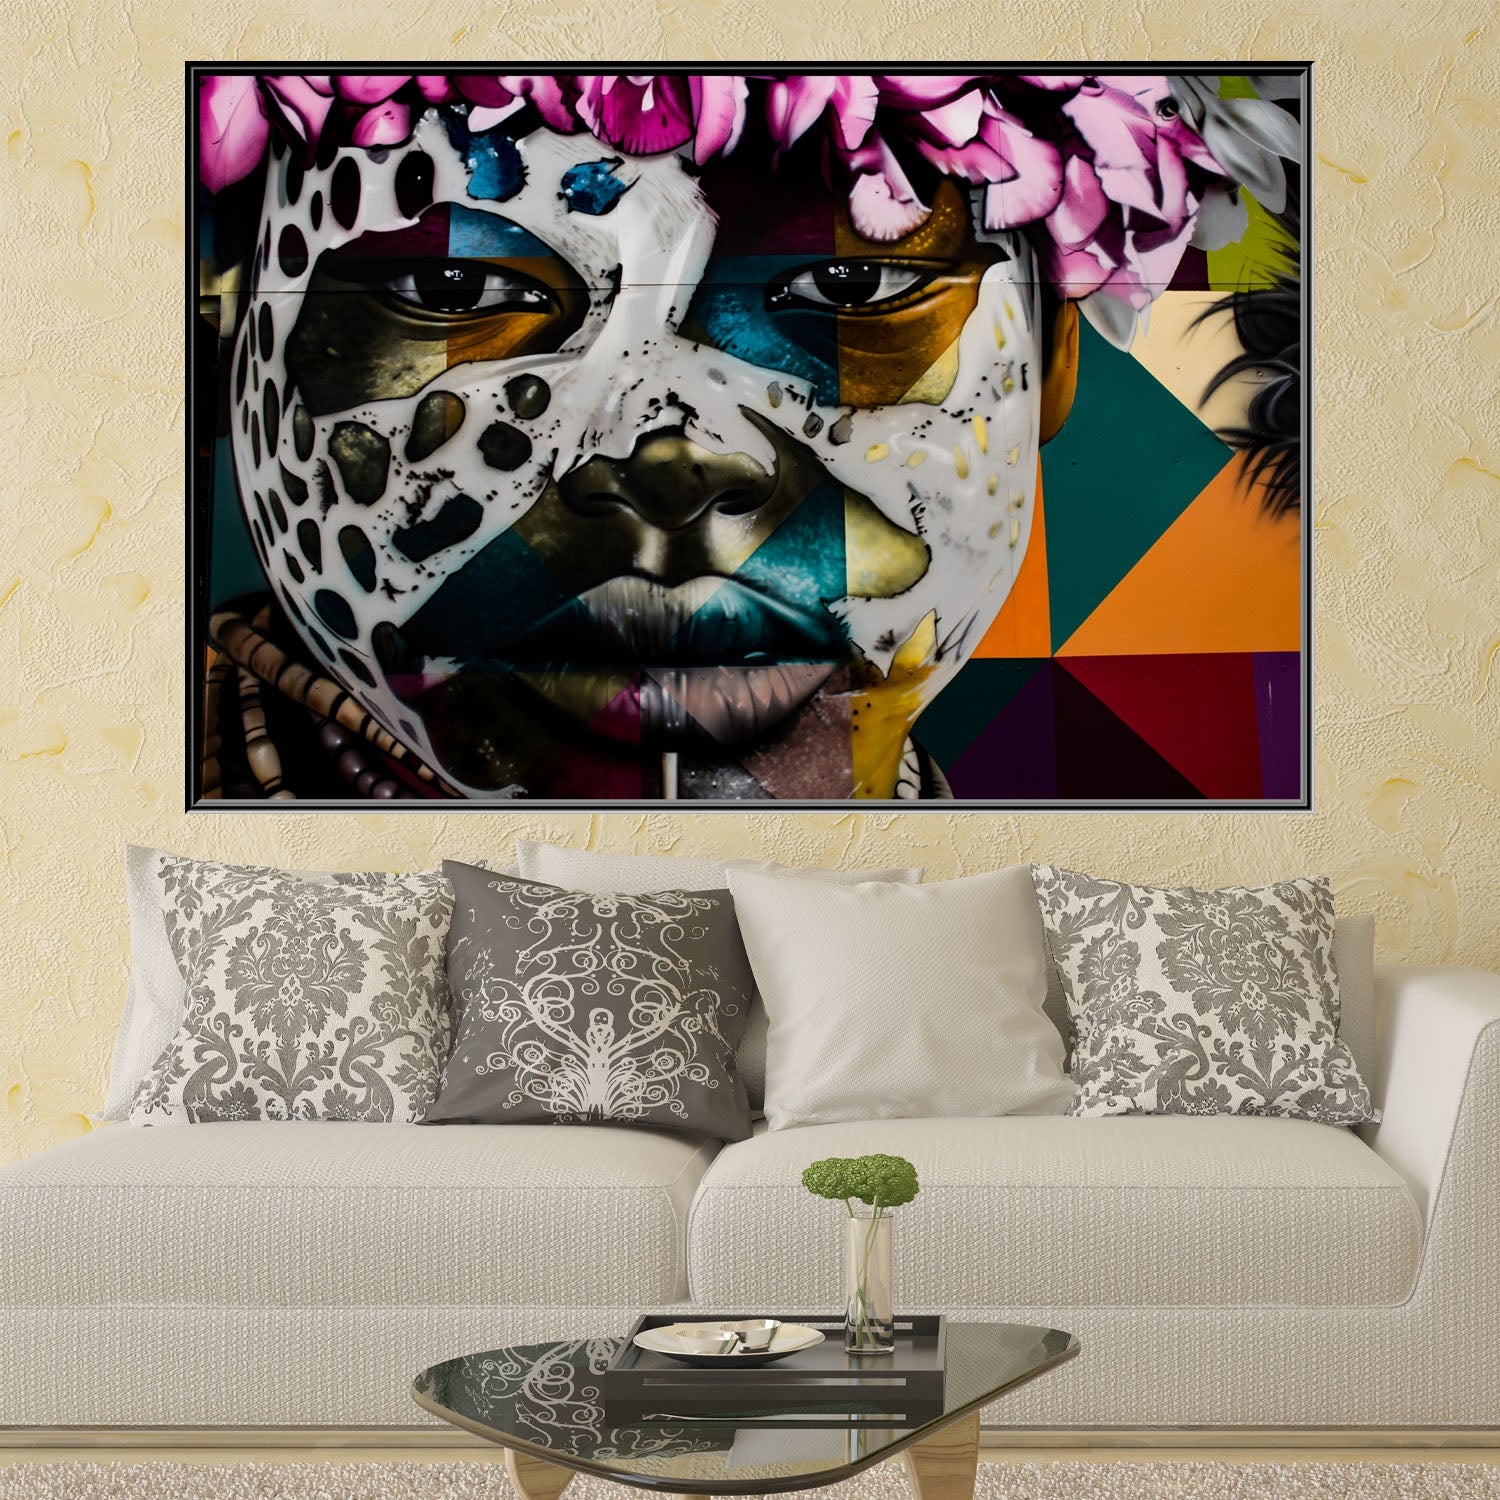 https://cdn.shopify.com/s/files/1/0387/9986/8044/products/AfricanBoyCanvasArtPrintStretched-4.jpg